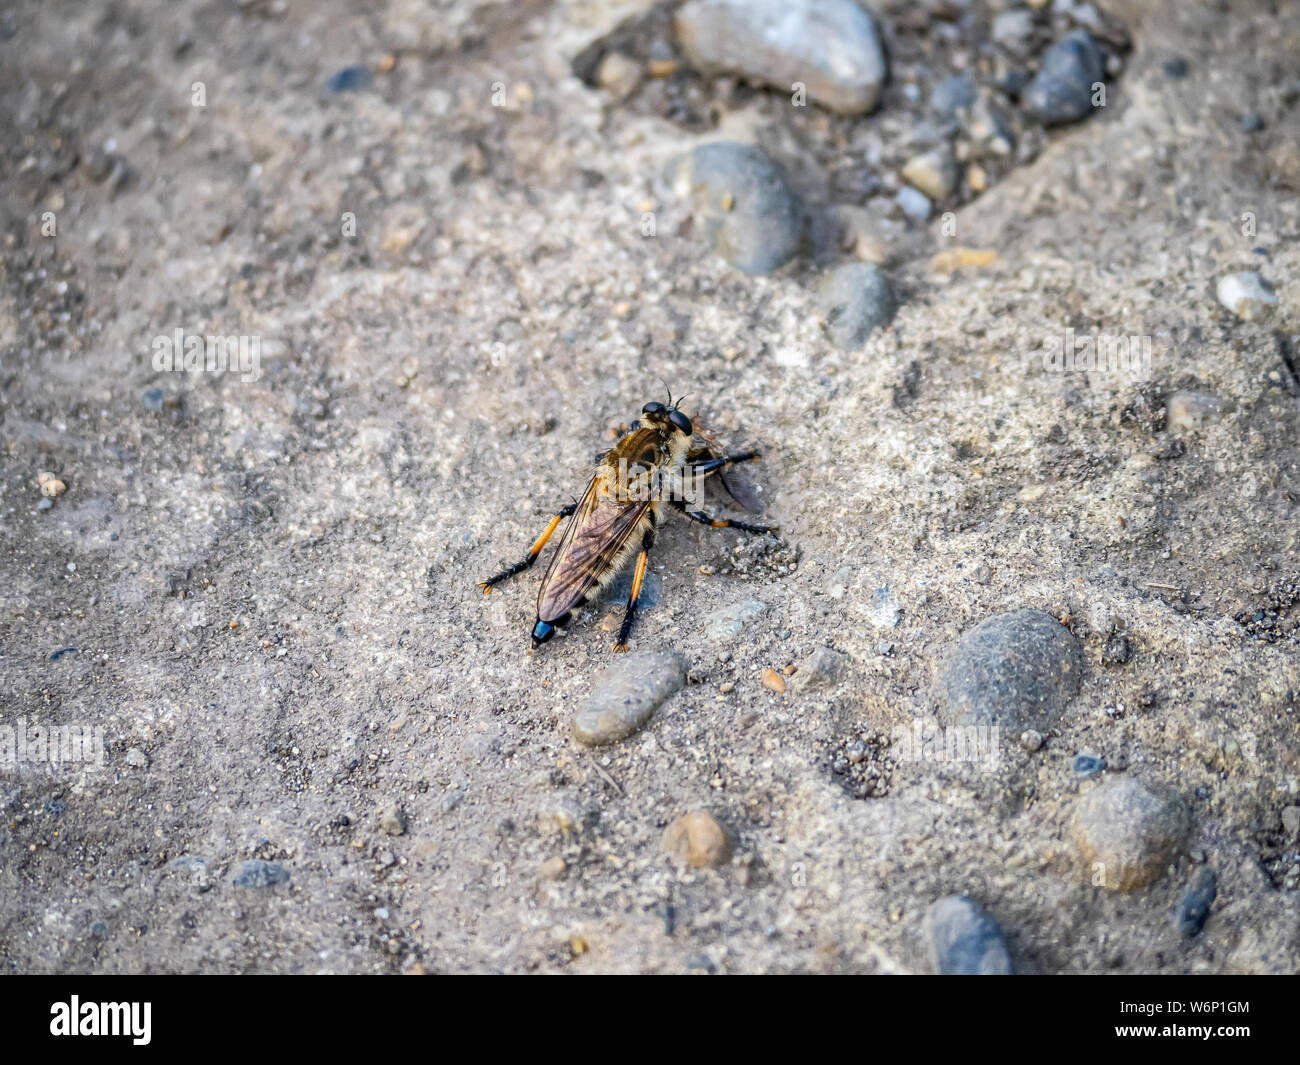 A shioya-abu robber fly, Promachus yesonicus, rests on a rock beside a small Japanese pond. Stock Photo